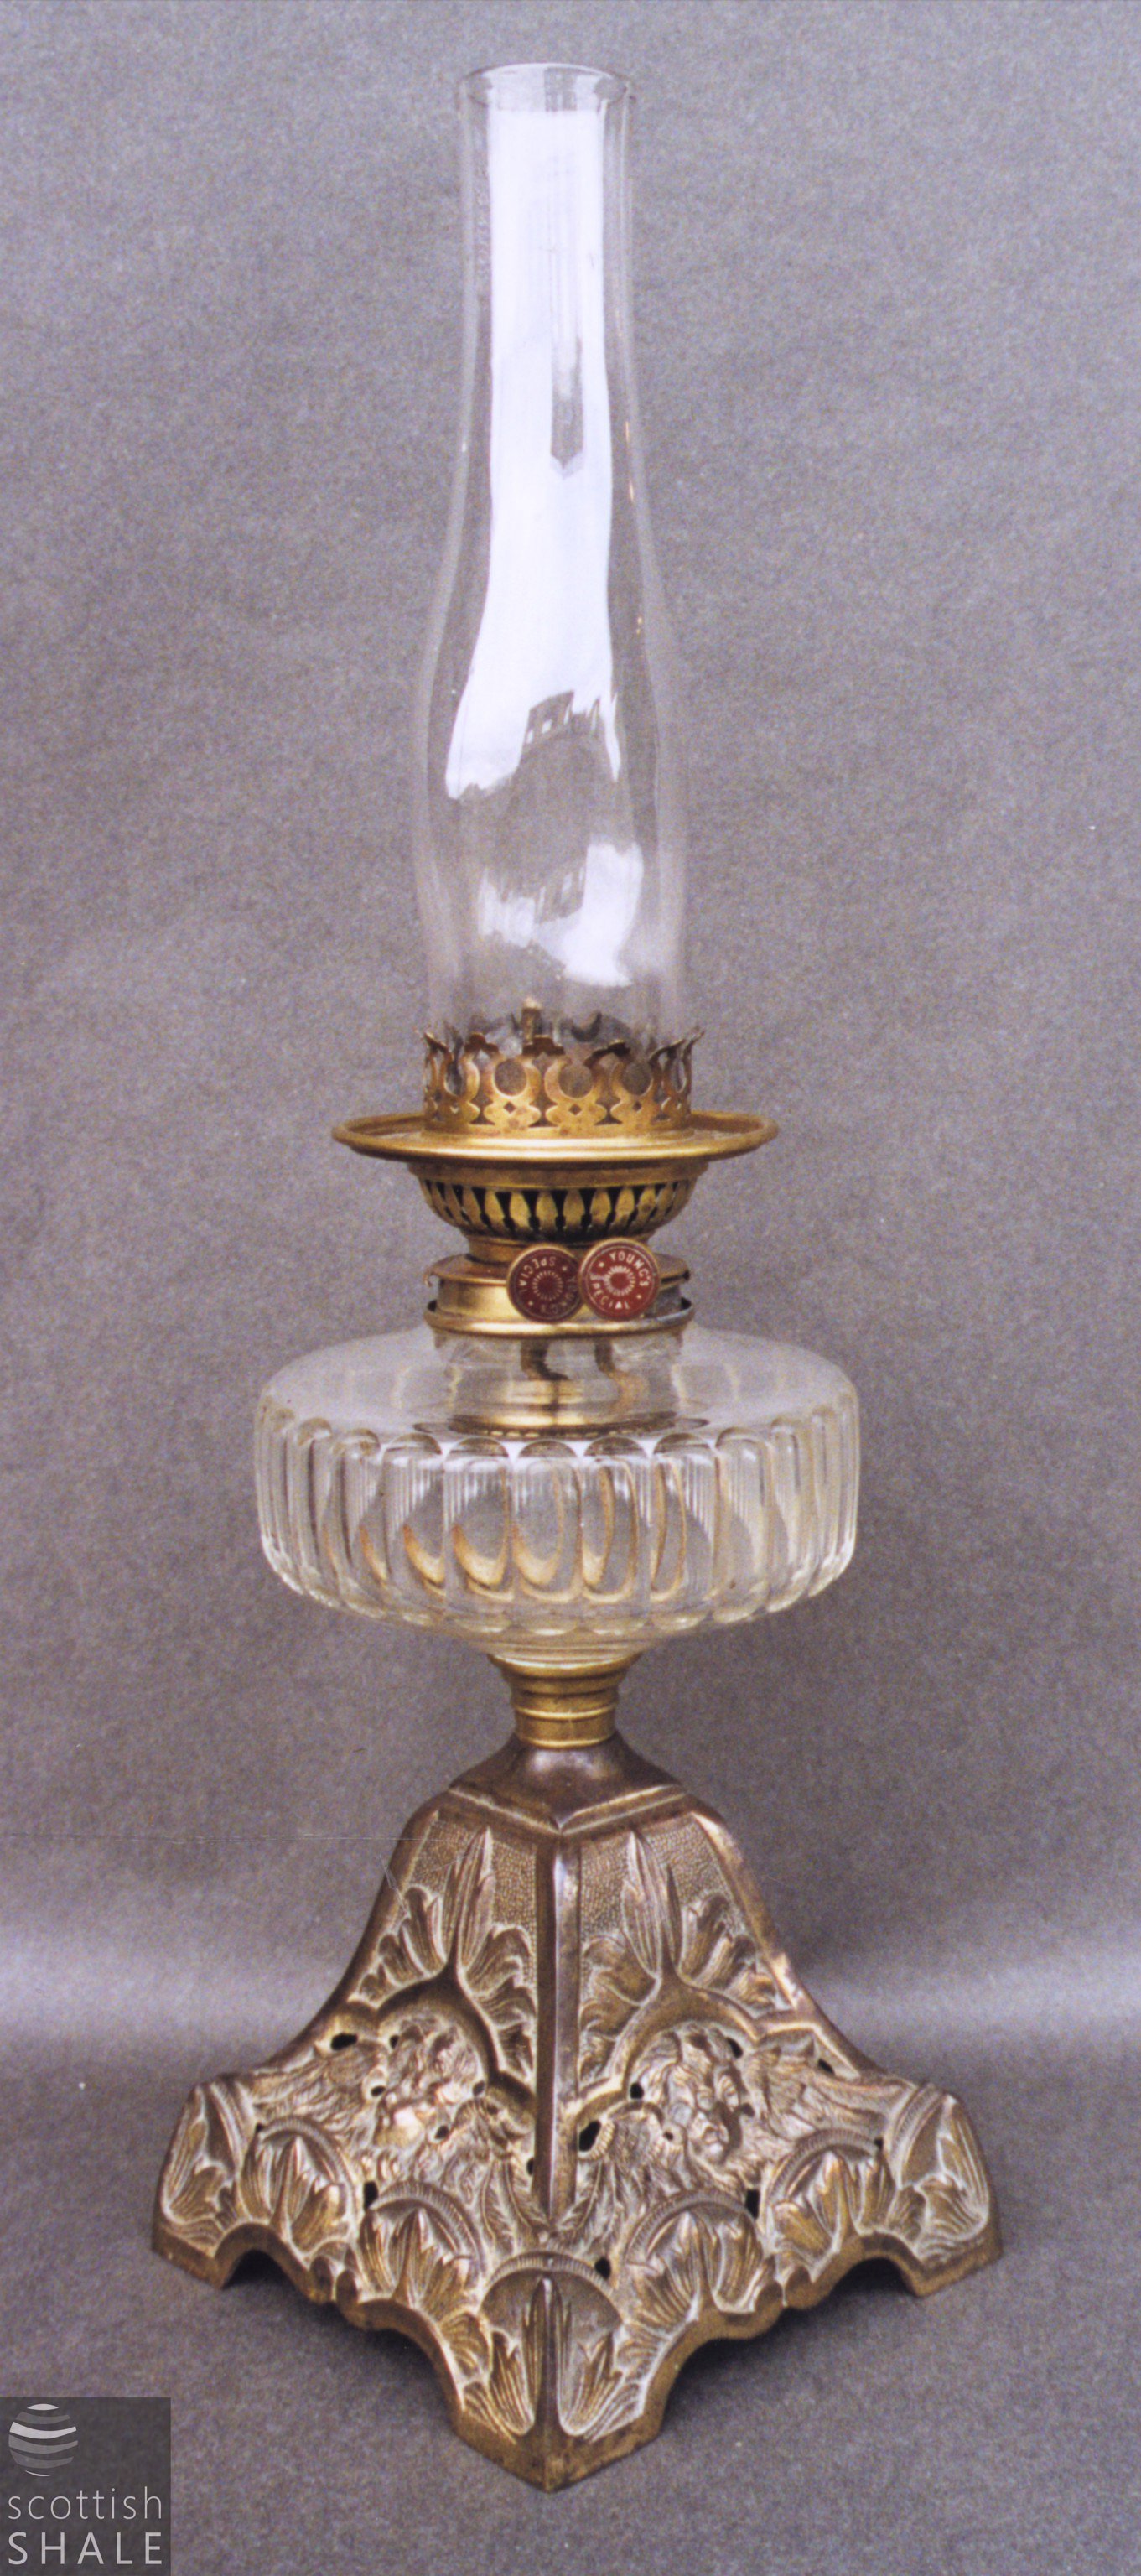 A paraffin lamp from the Scottish Shale Oil Museum Collection 